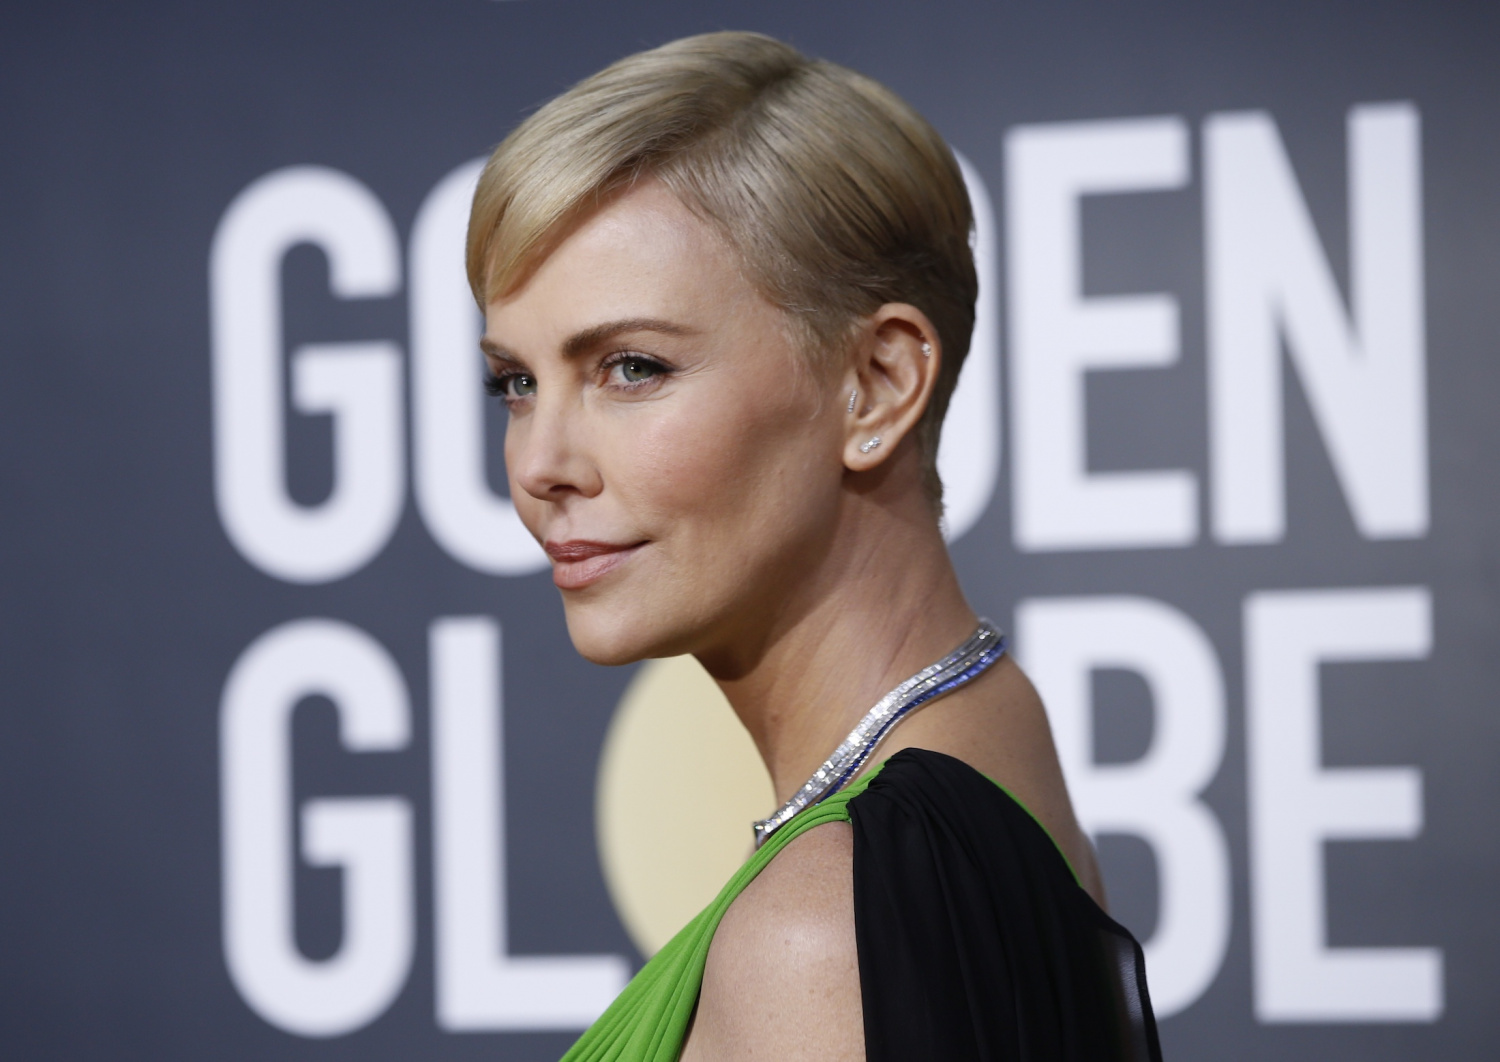 Charlize Theron is back with a brand new action film on Netflix and the fir...